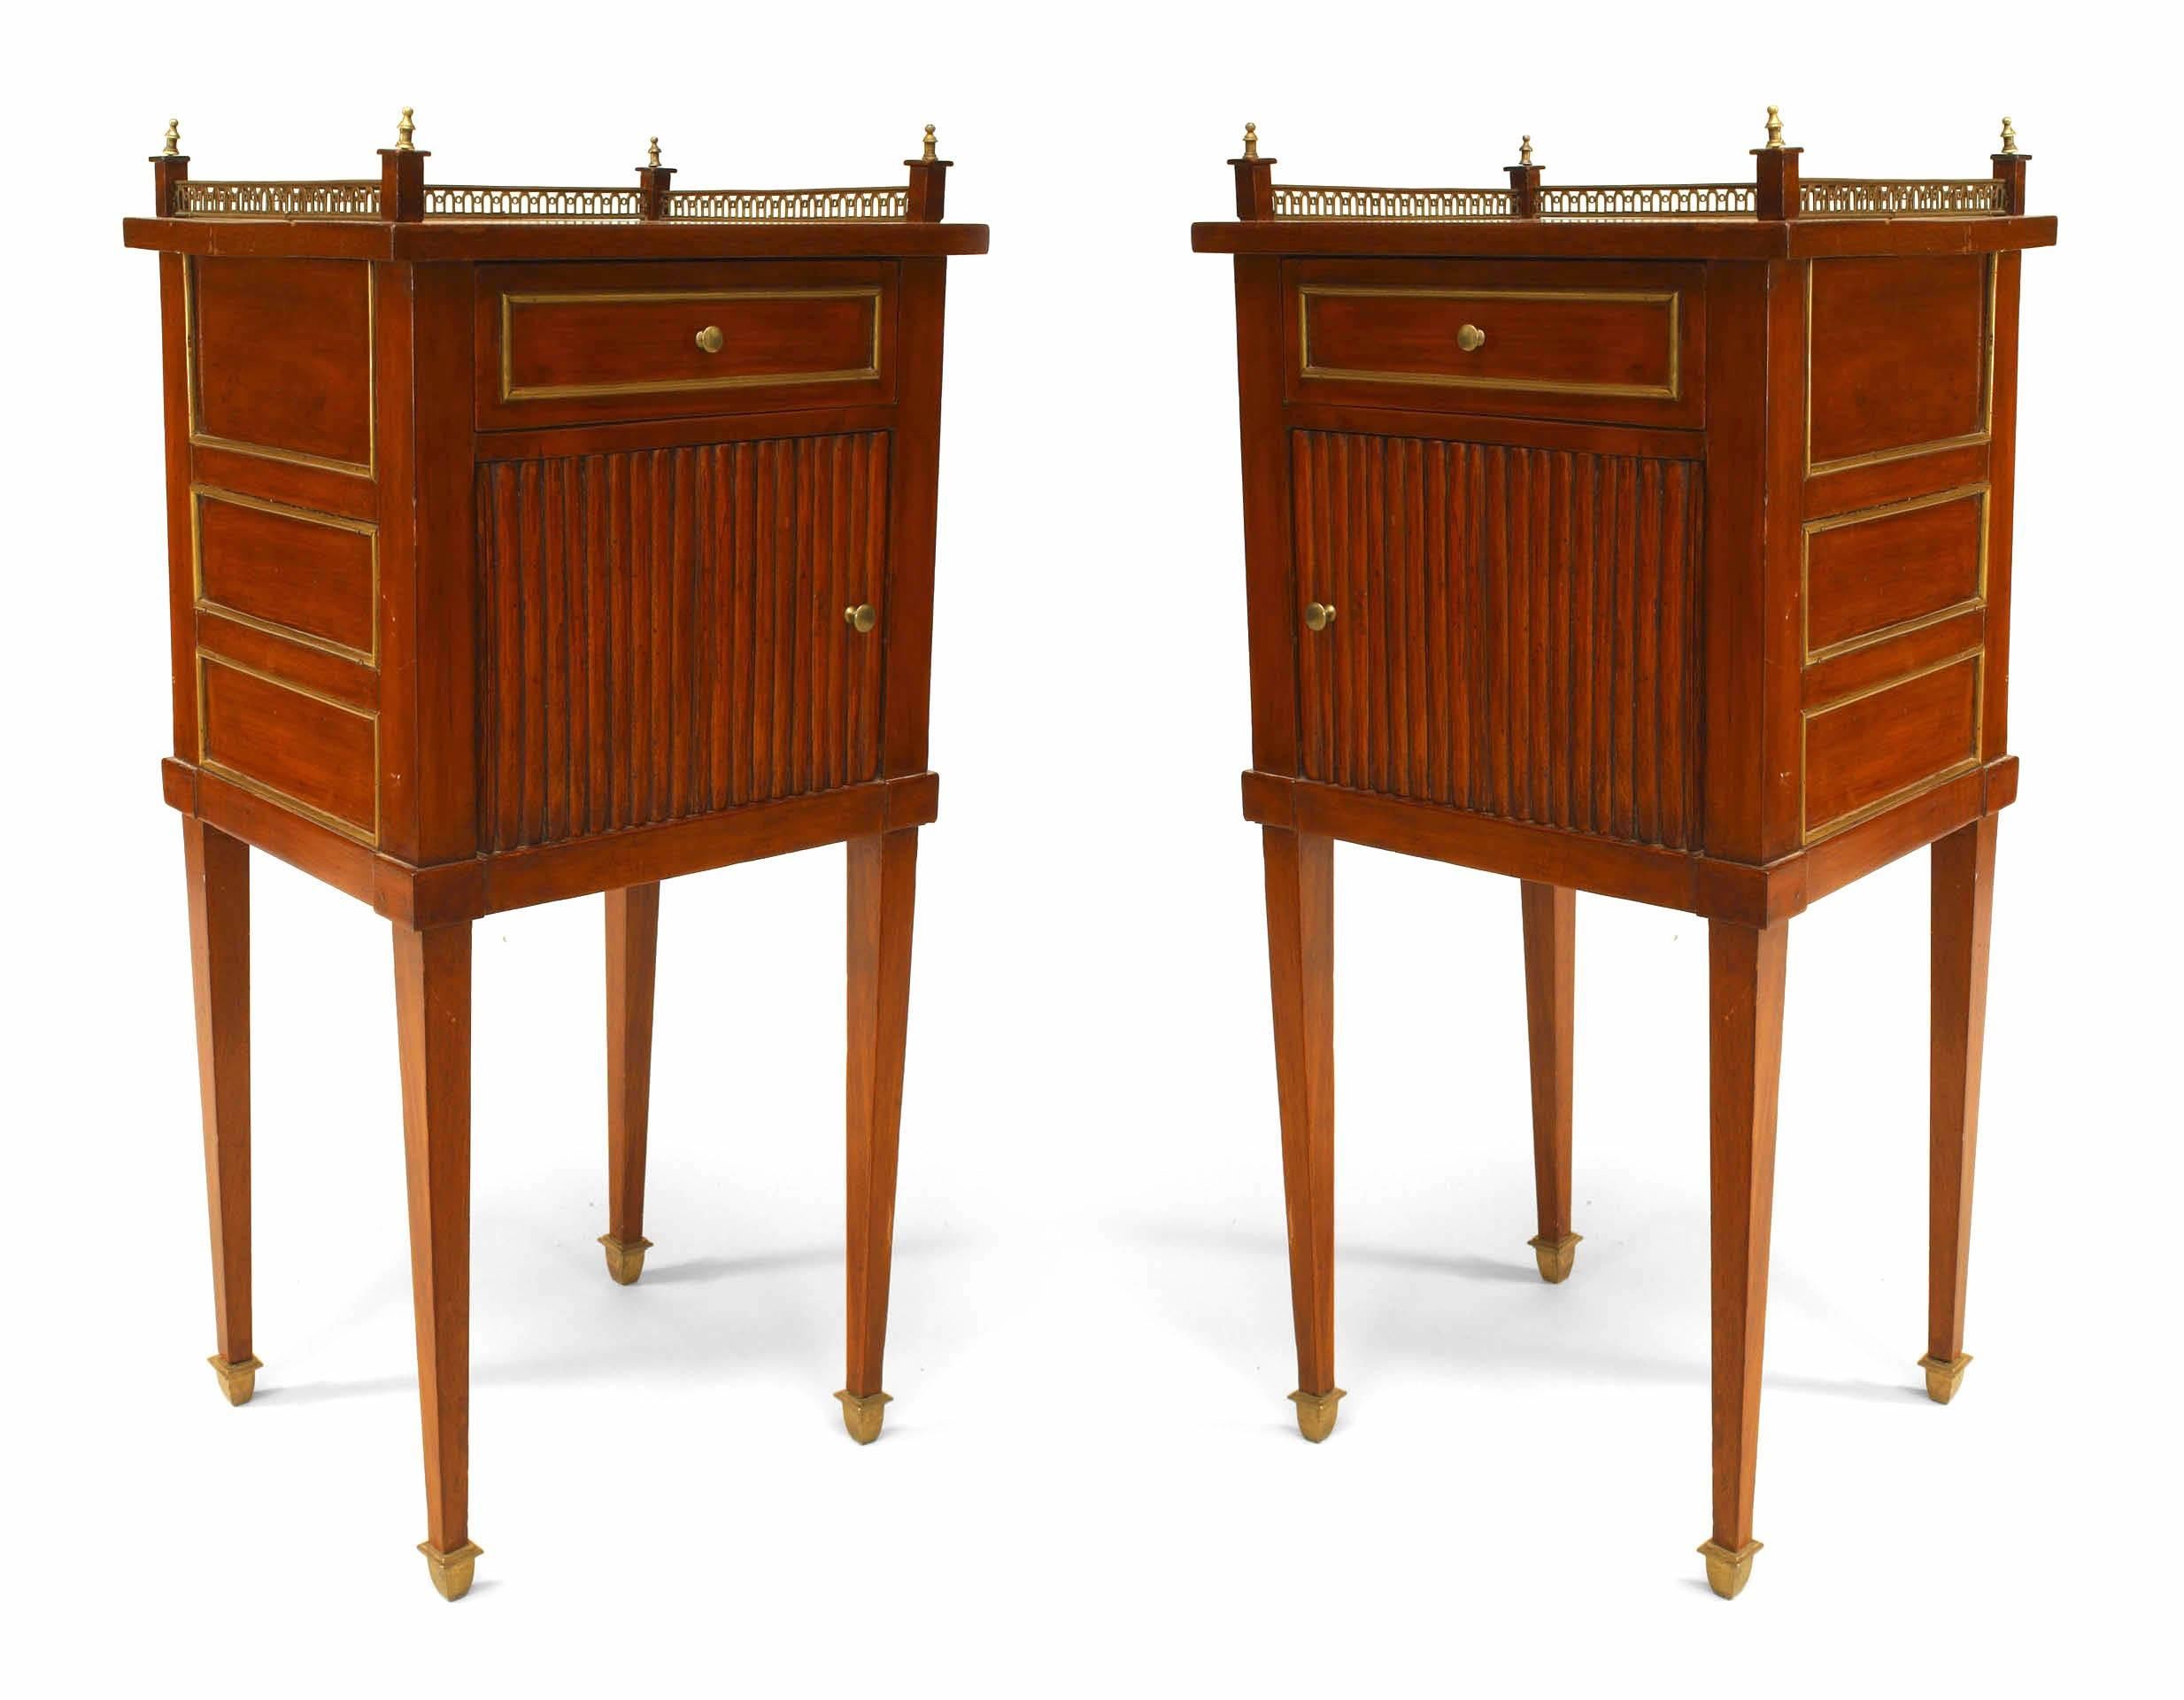 Pair of rectangular Louis XVI mahogany bedside commodes each with a fluted door beneath a single drawer and a brass gallery top with corner finials.